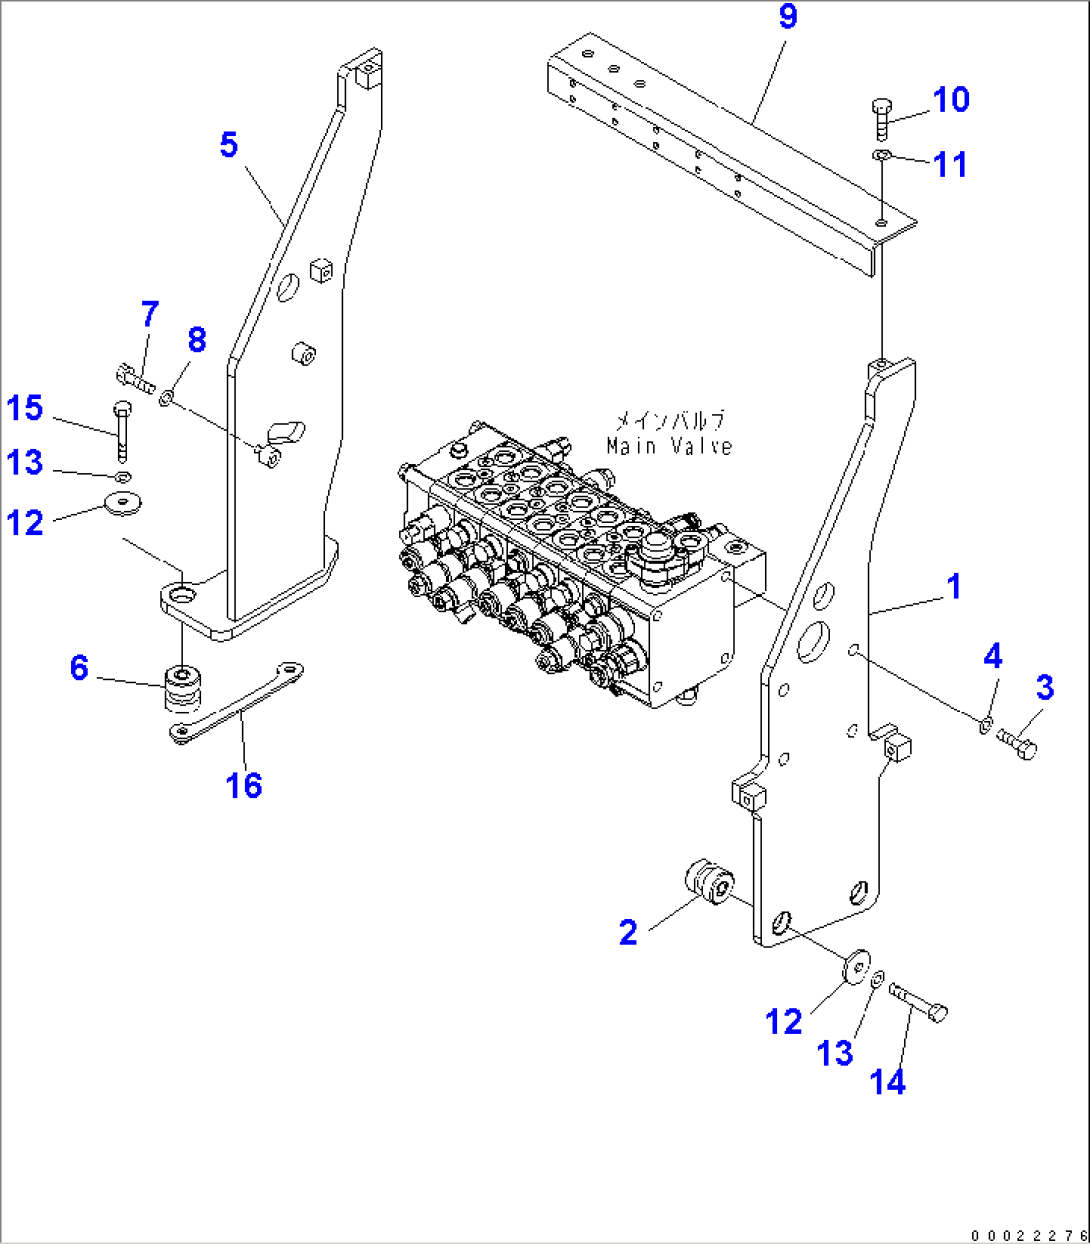 MAIN VALVE AND MOUNTING PARTS (FOR 1-PIECE BOOM)